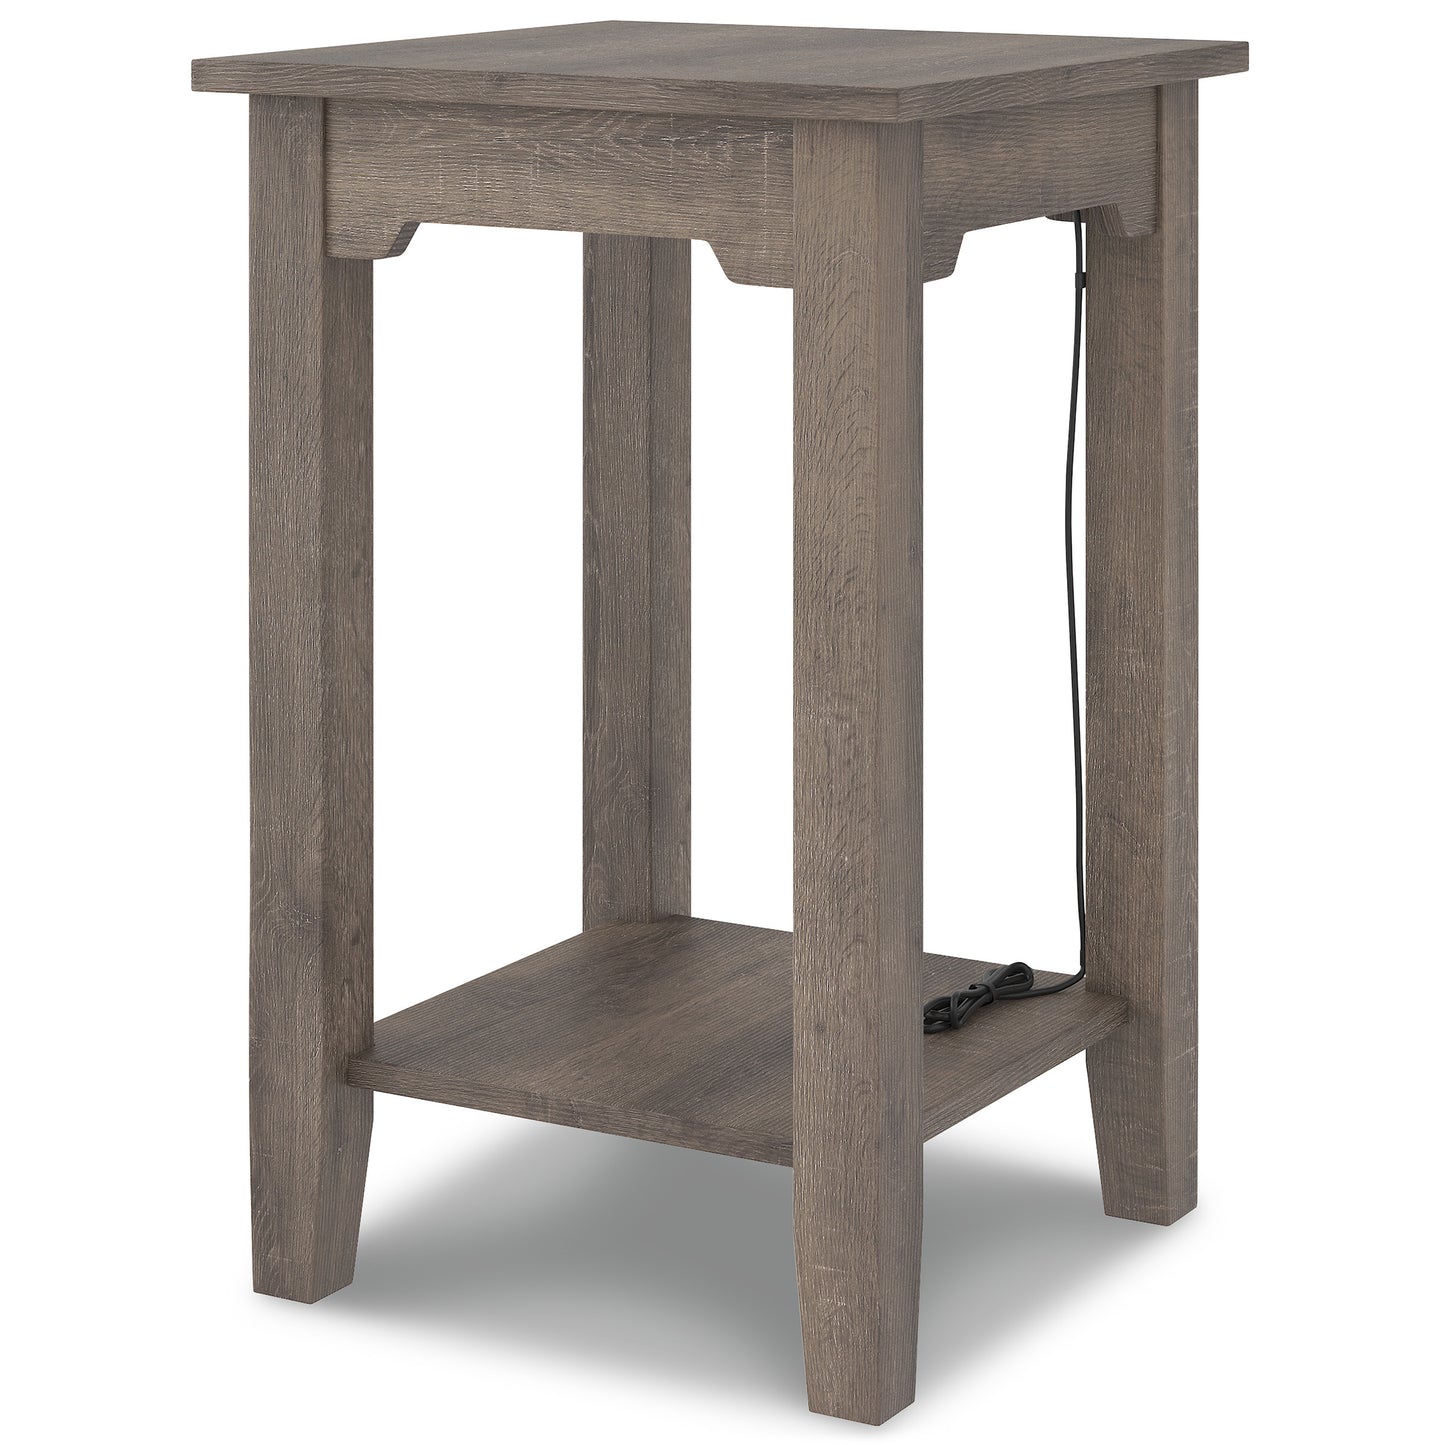 T27 Chairside End Table